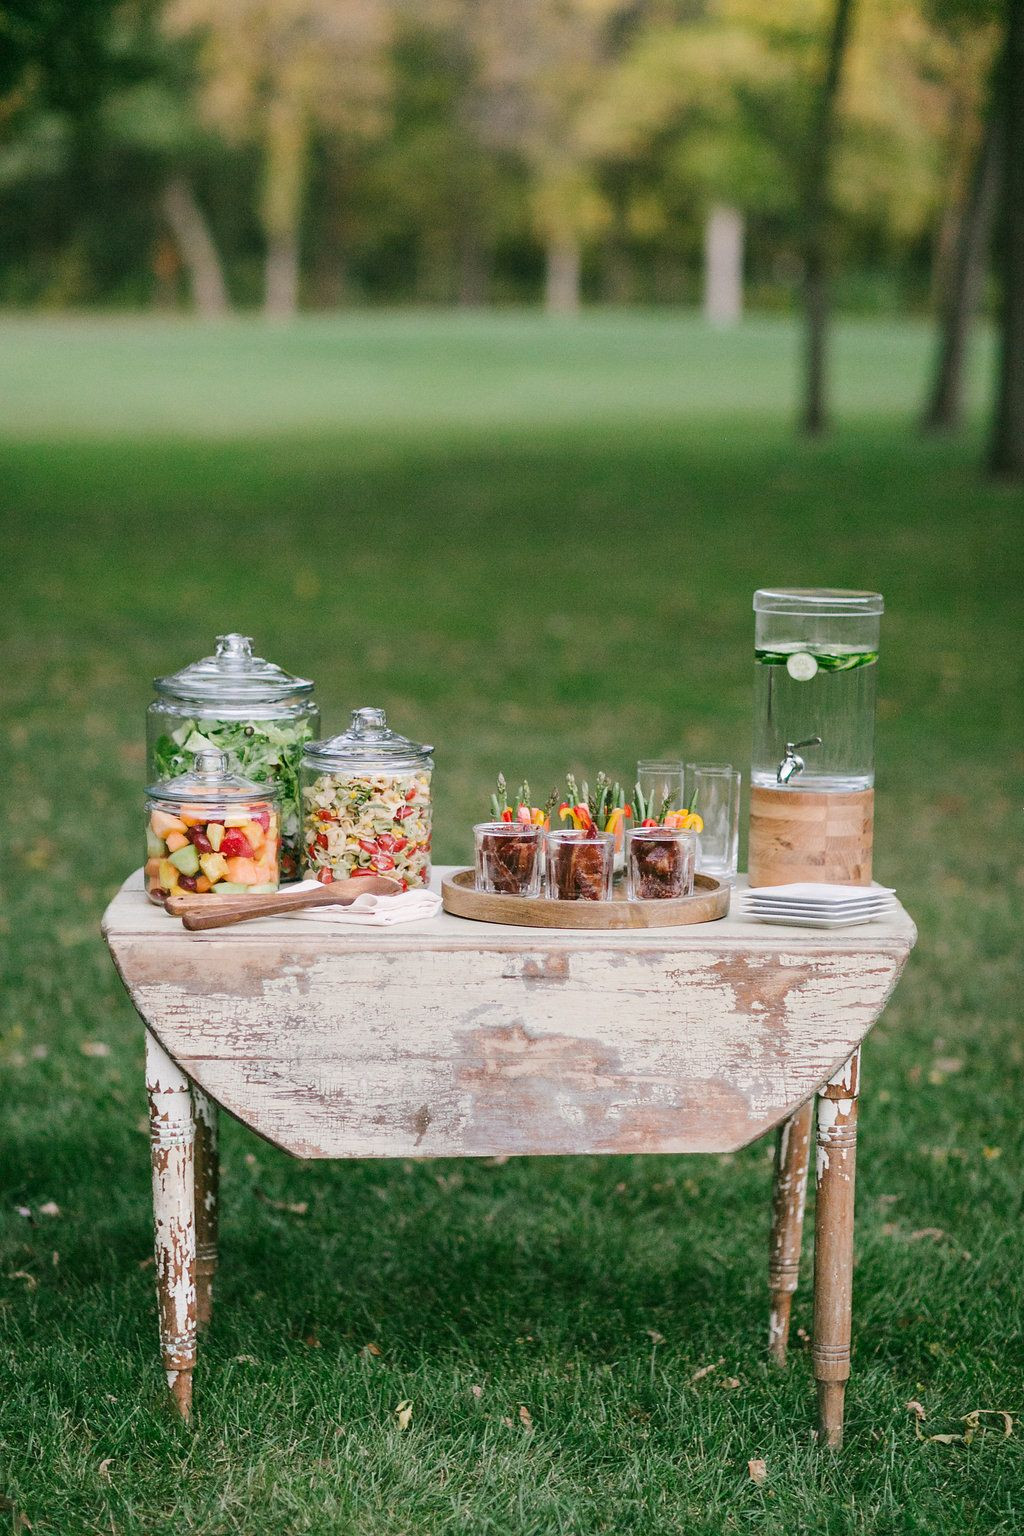 Ideas To Decorate Backyard For Engagement Party
 Backyard Engagement Party Ideas